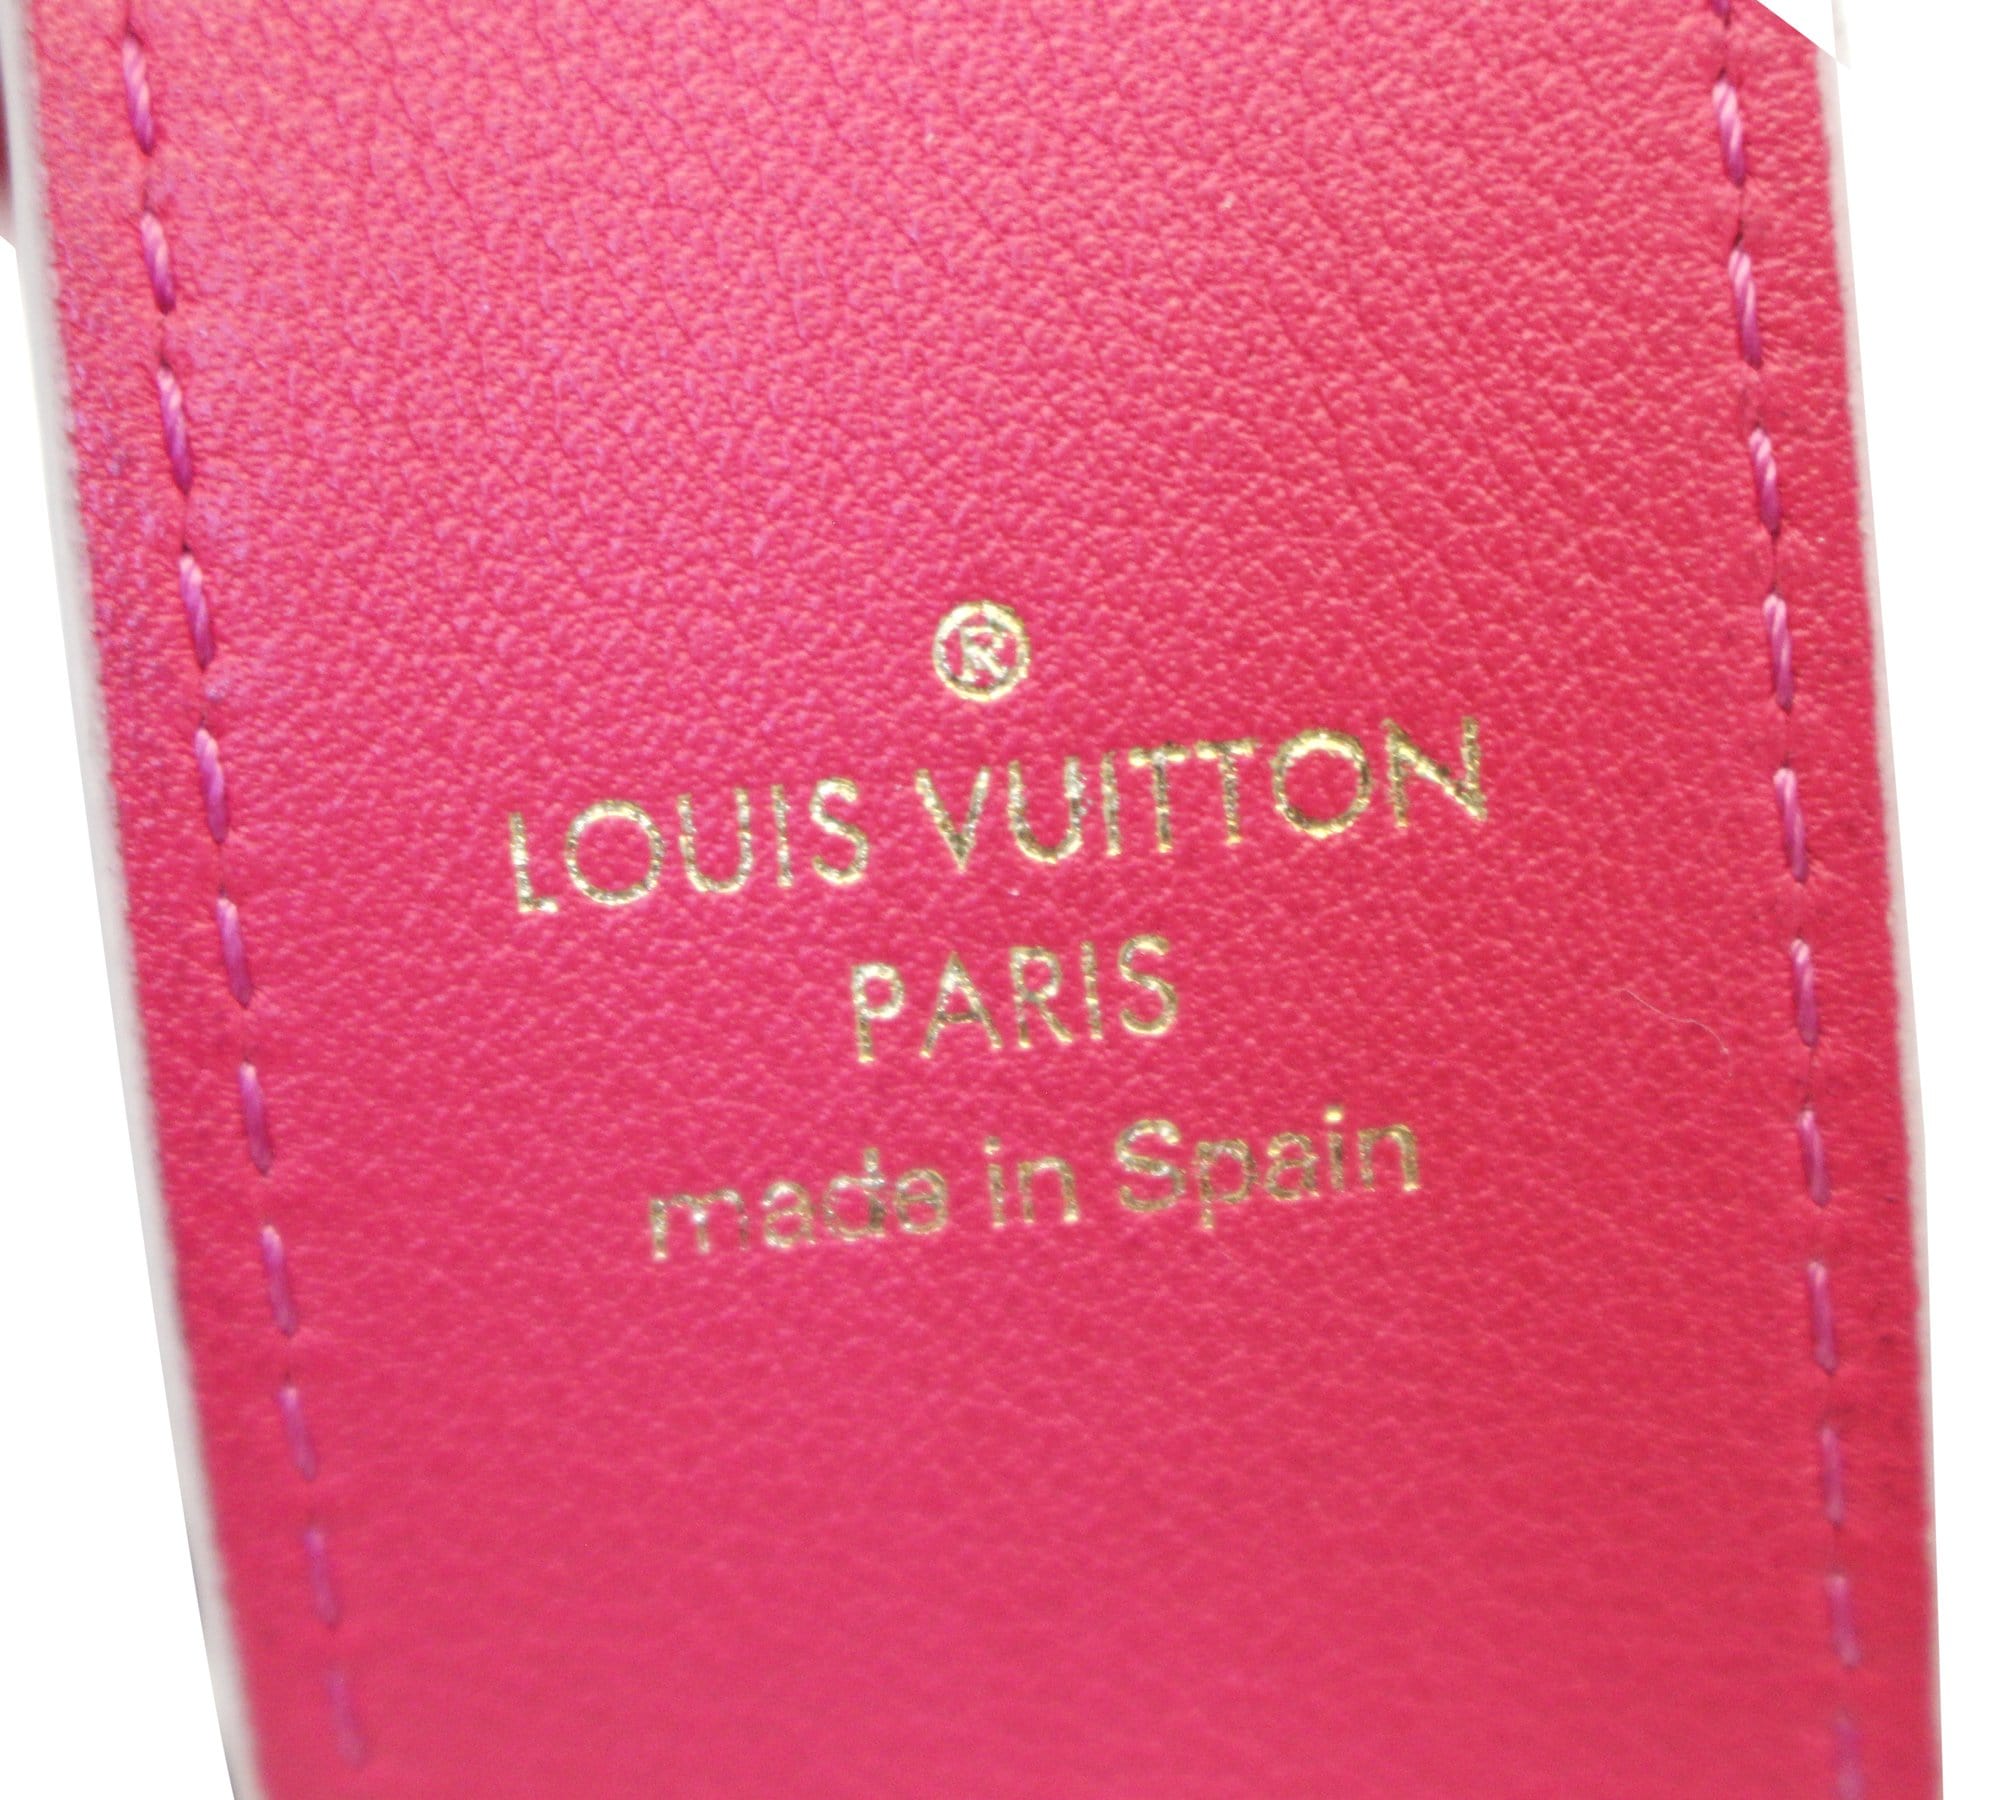 ✨TRADED✨ Louis Vuitton Thick Pink/Monogram Strap